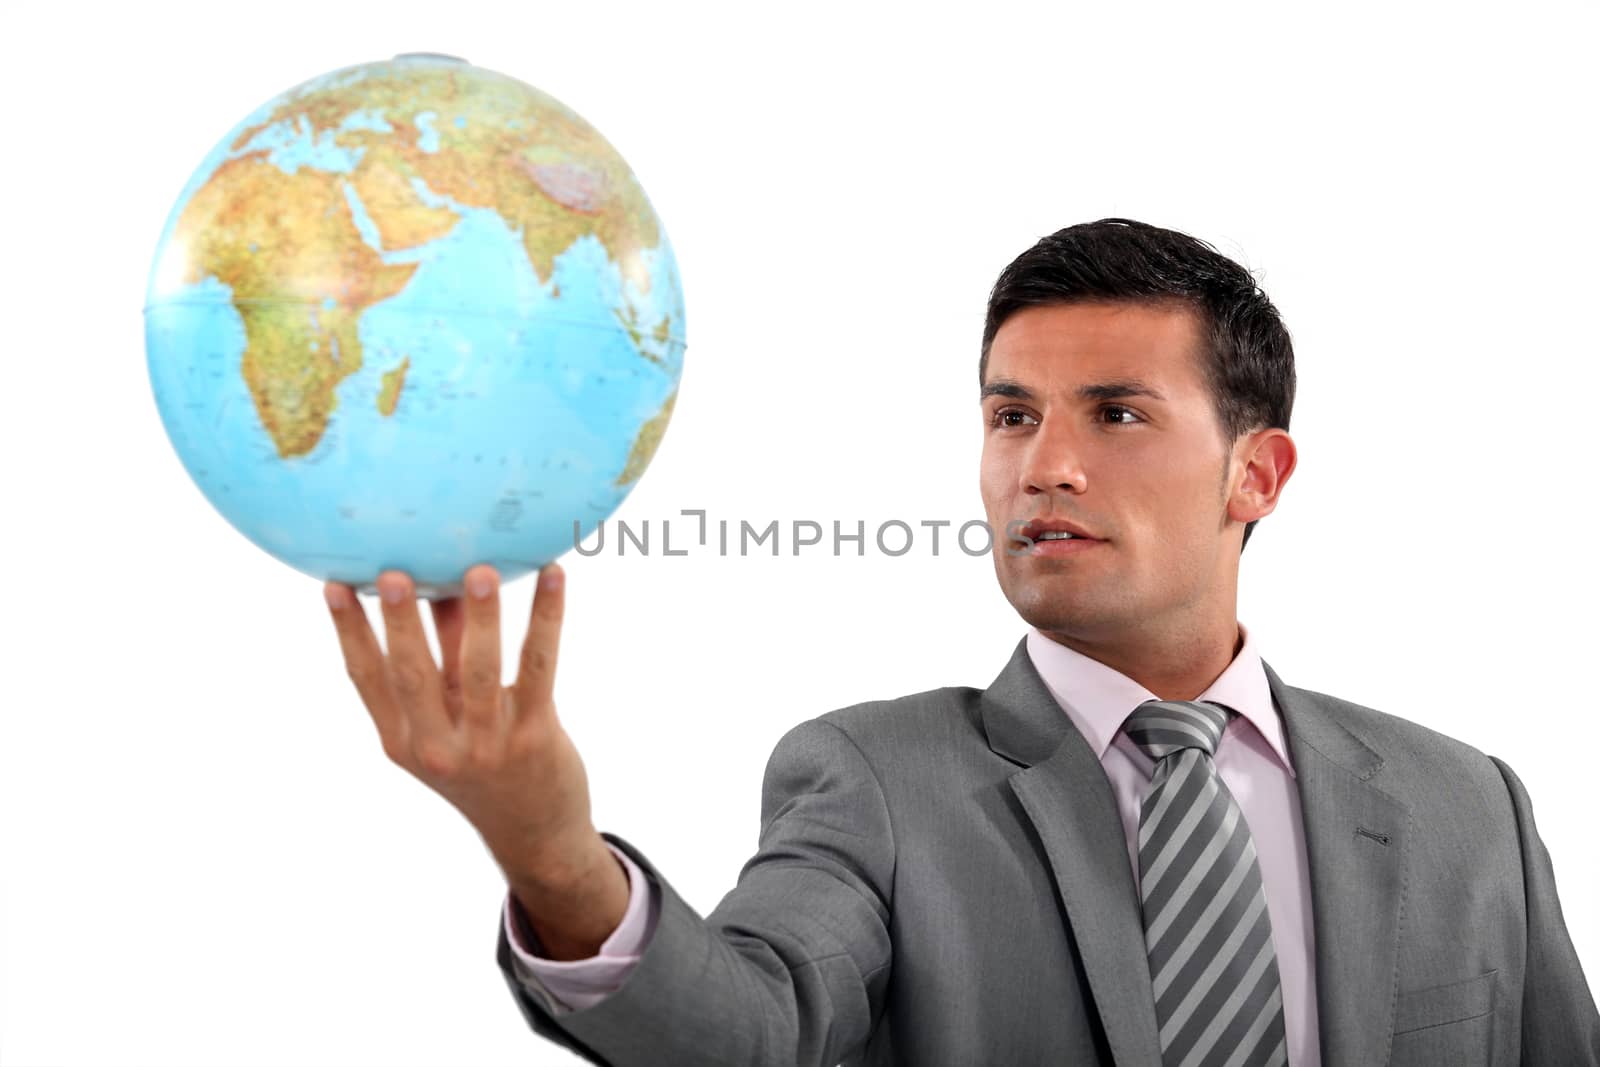 Ambitious businessman with globe in hand by phovoir